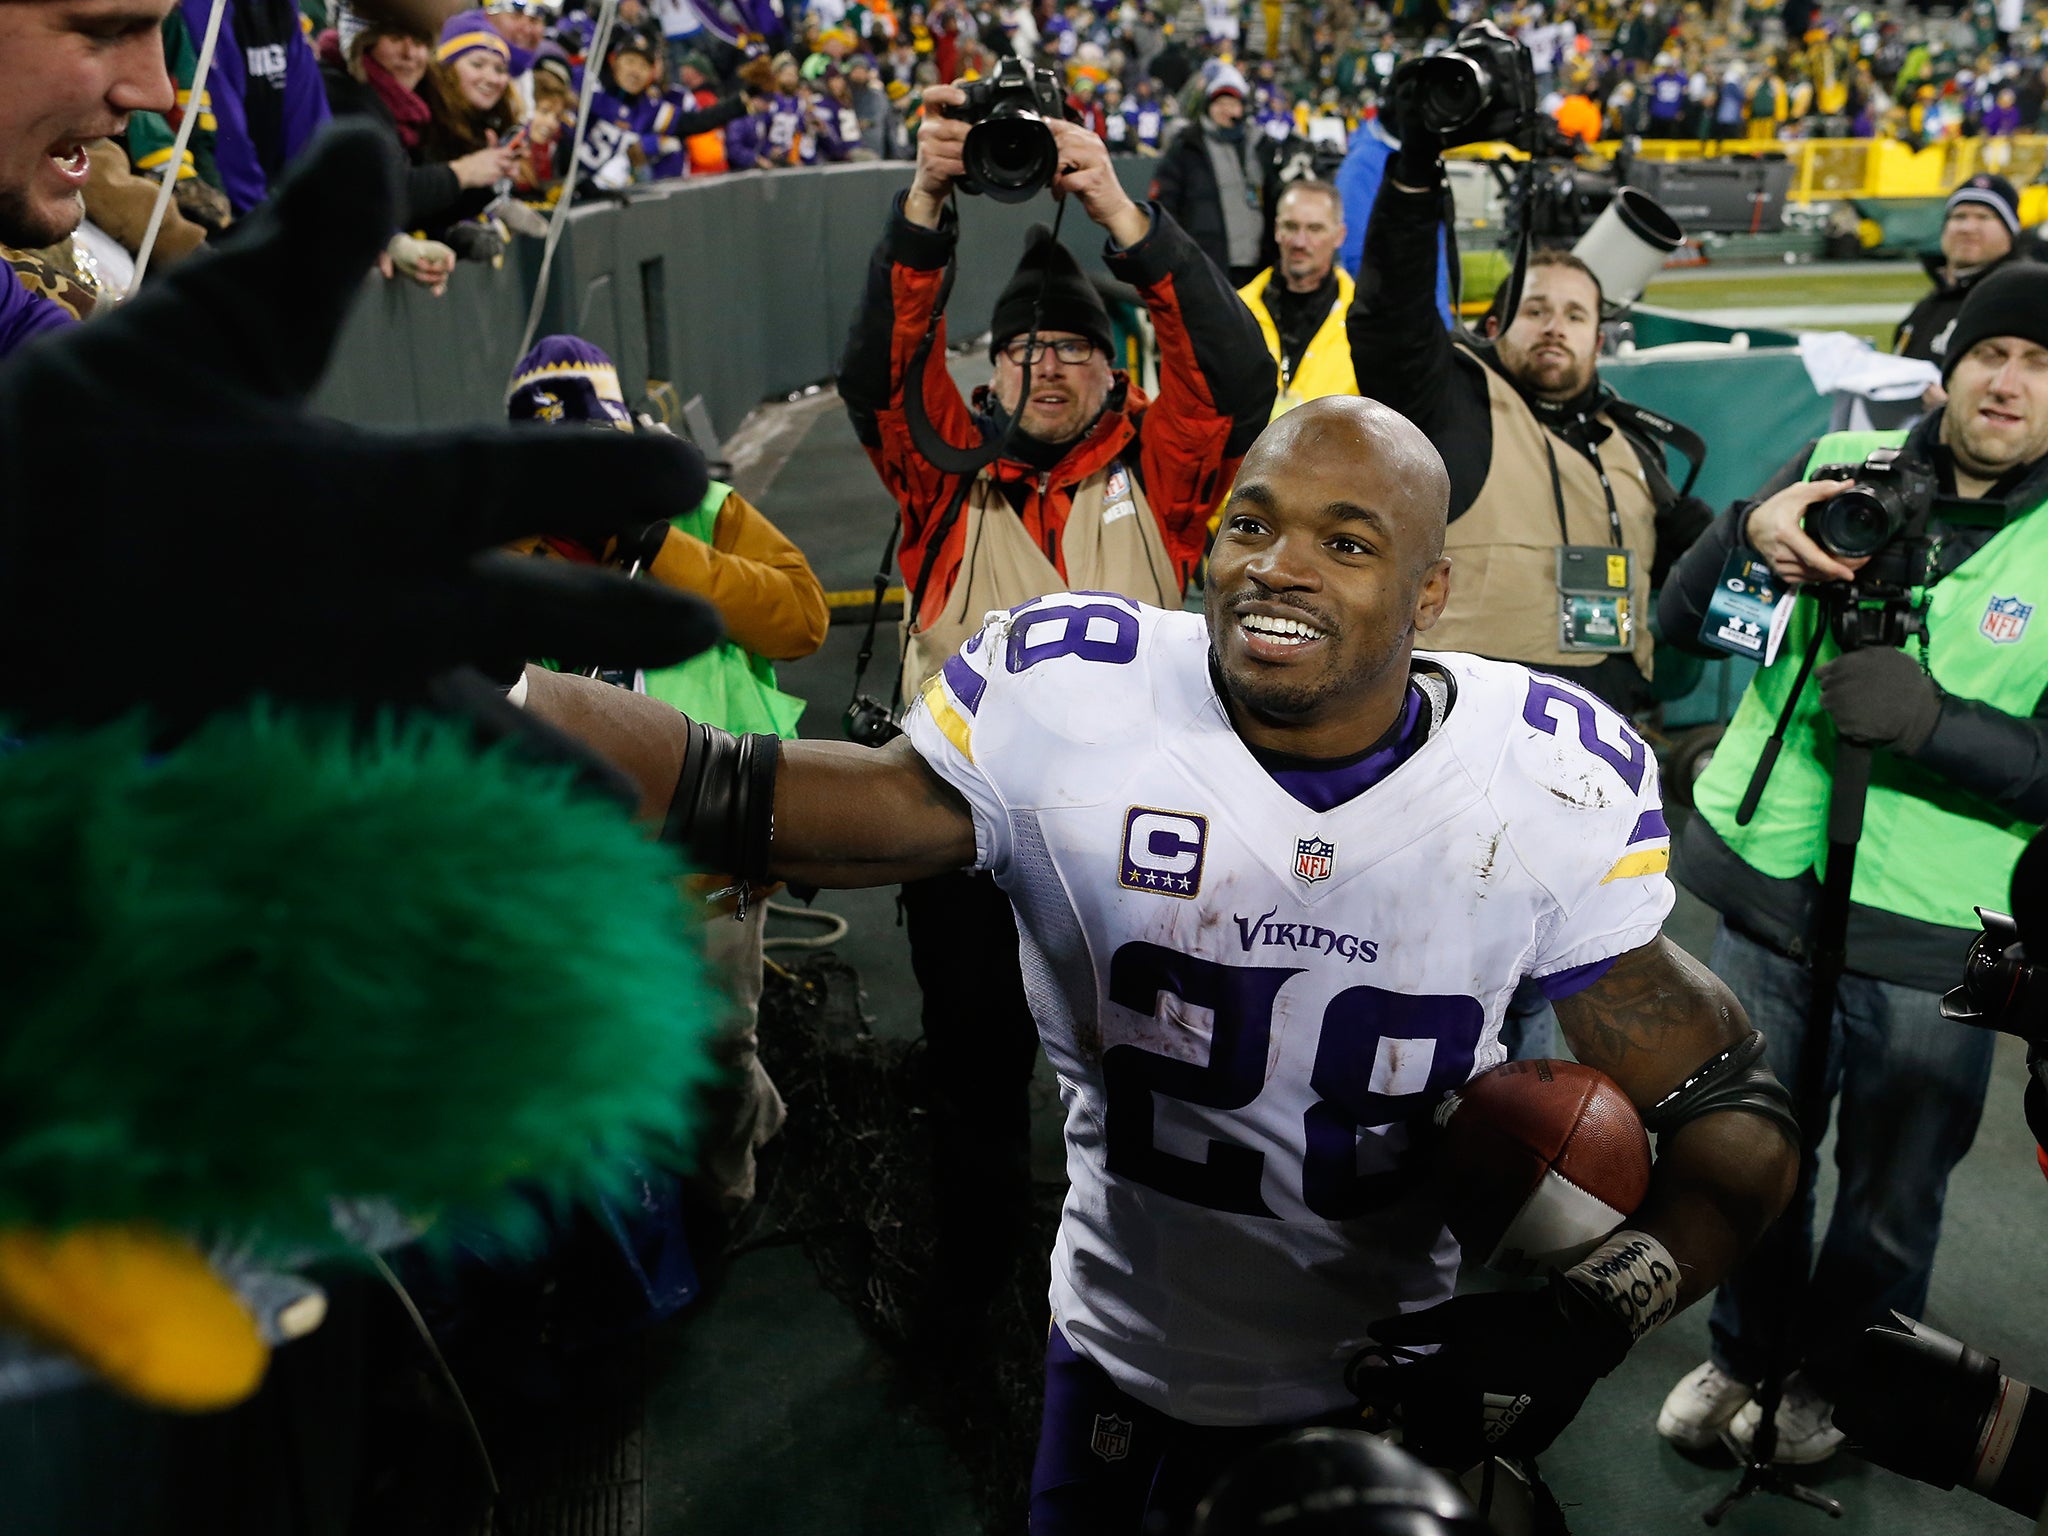 Adrian Peterson led the Vikings to their first division title since 2009